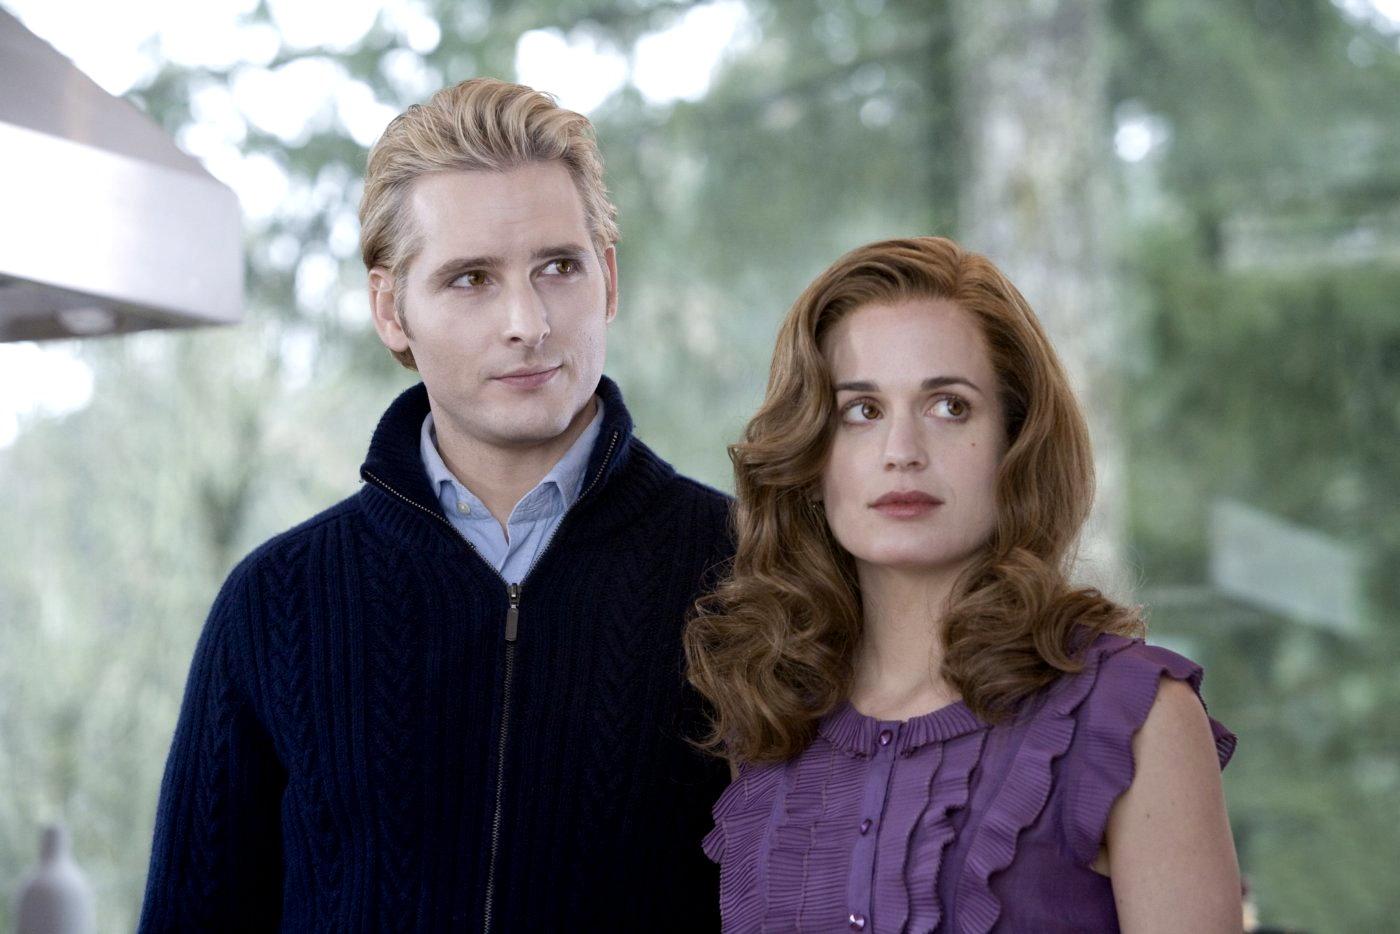 Peter Facinelli stars as Dr. Carlisle Cullen and Elizabeth Reaser stars as Esme Cullen in Summit Entertainment's Twilight (2008)